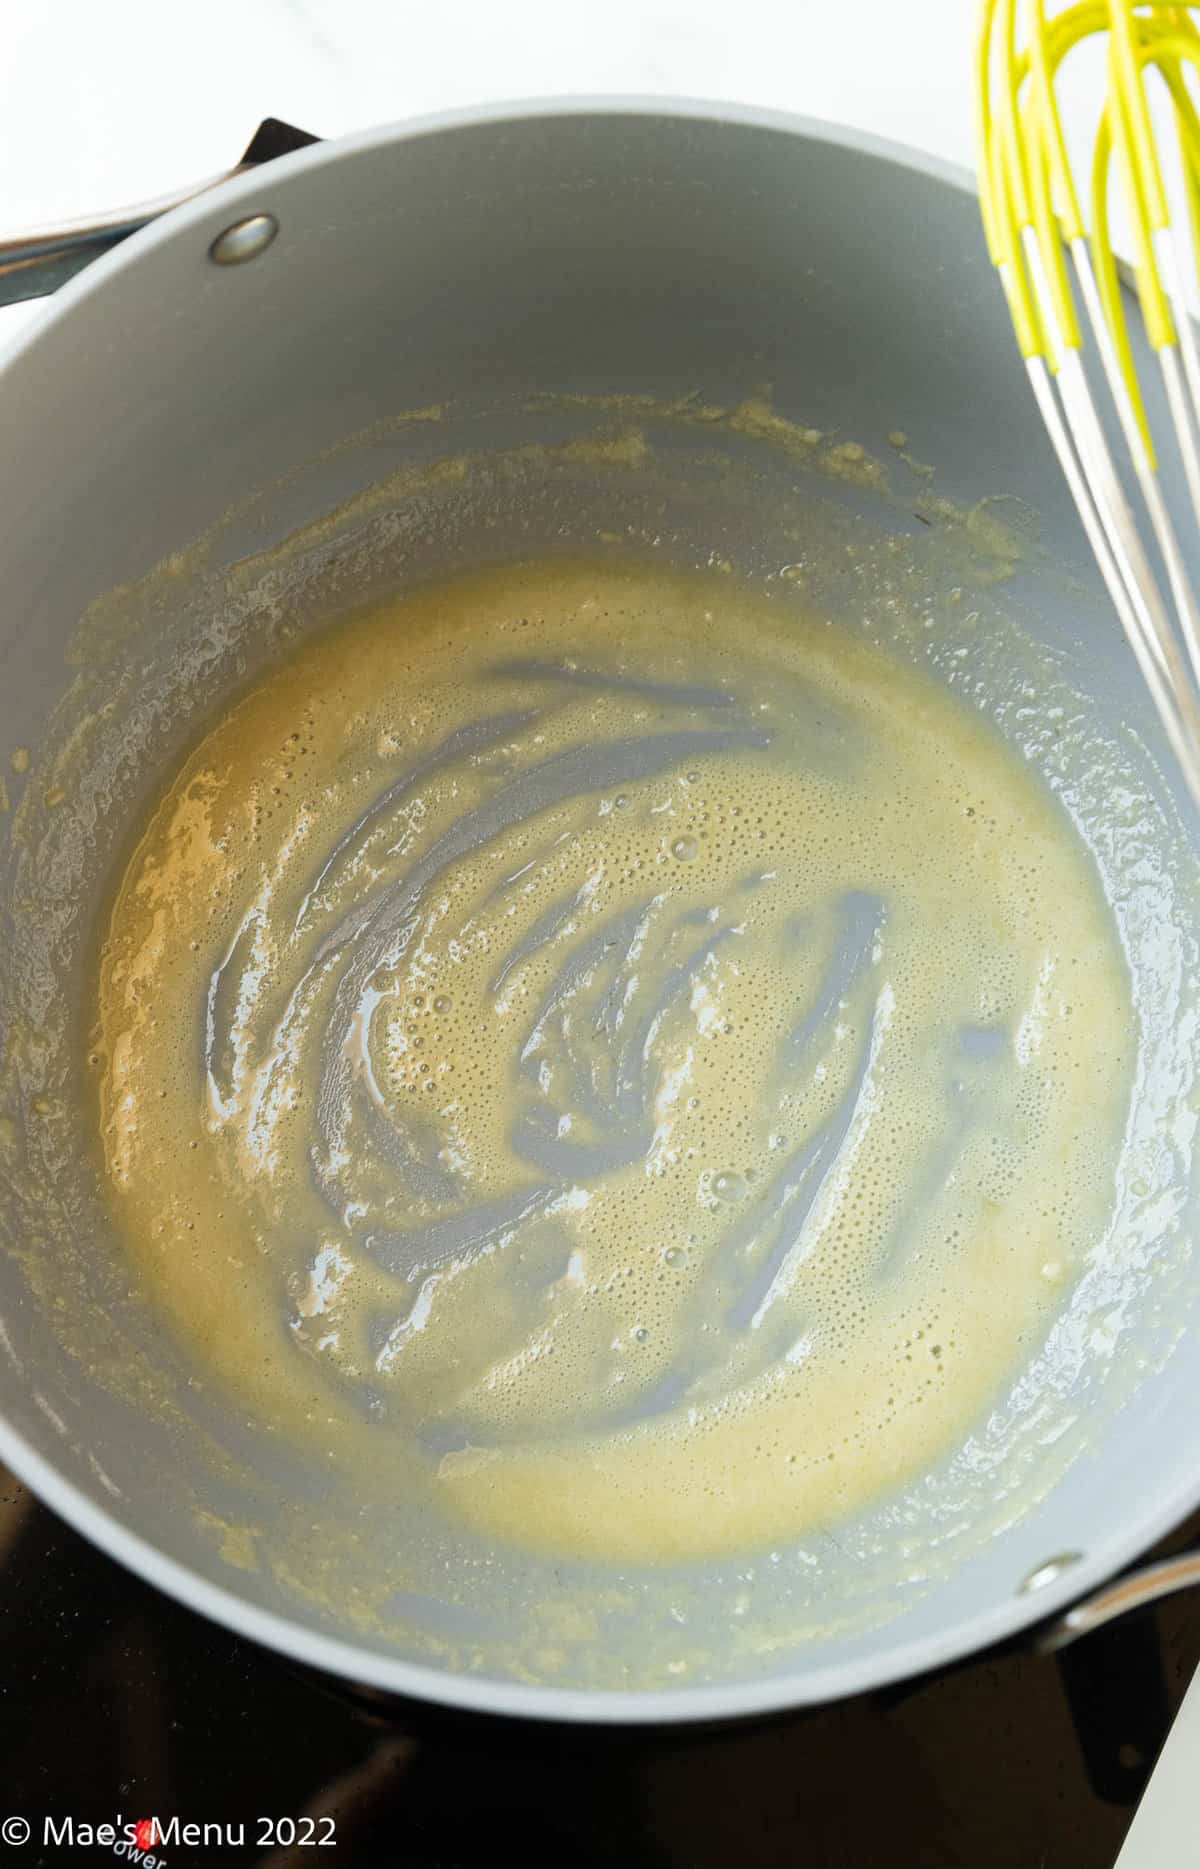 roux has cooked to a light golden color.